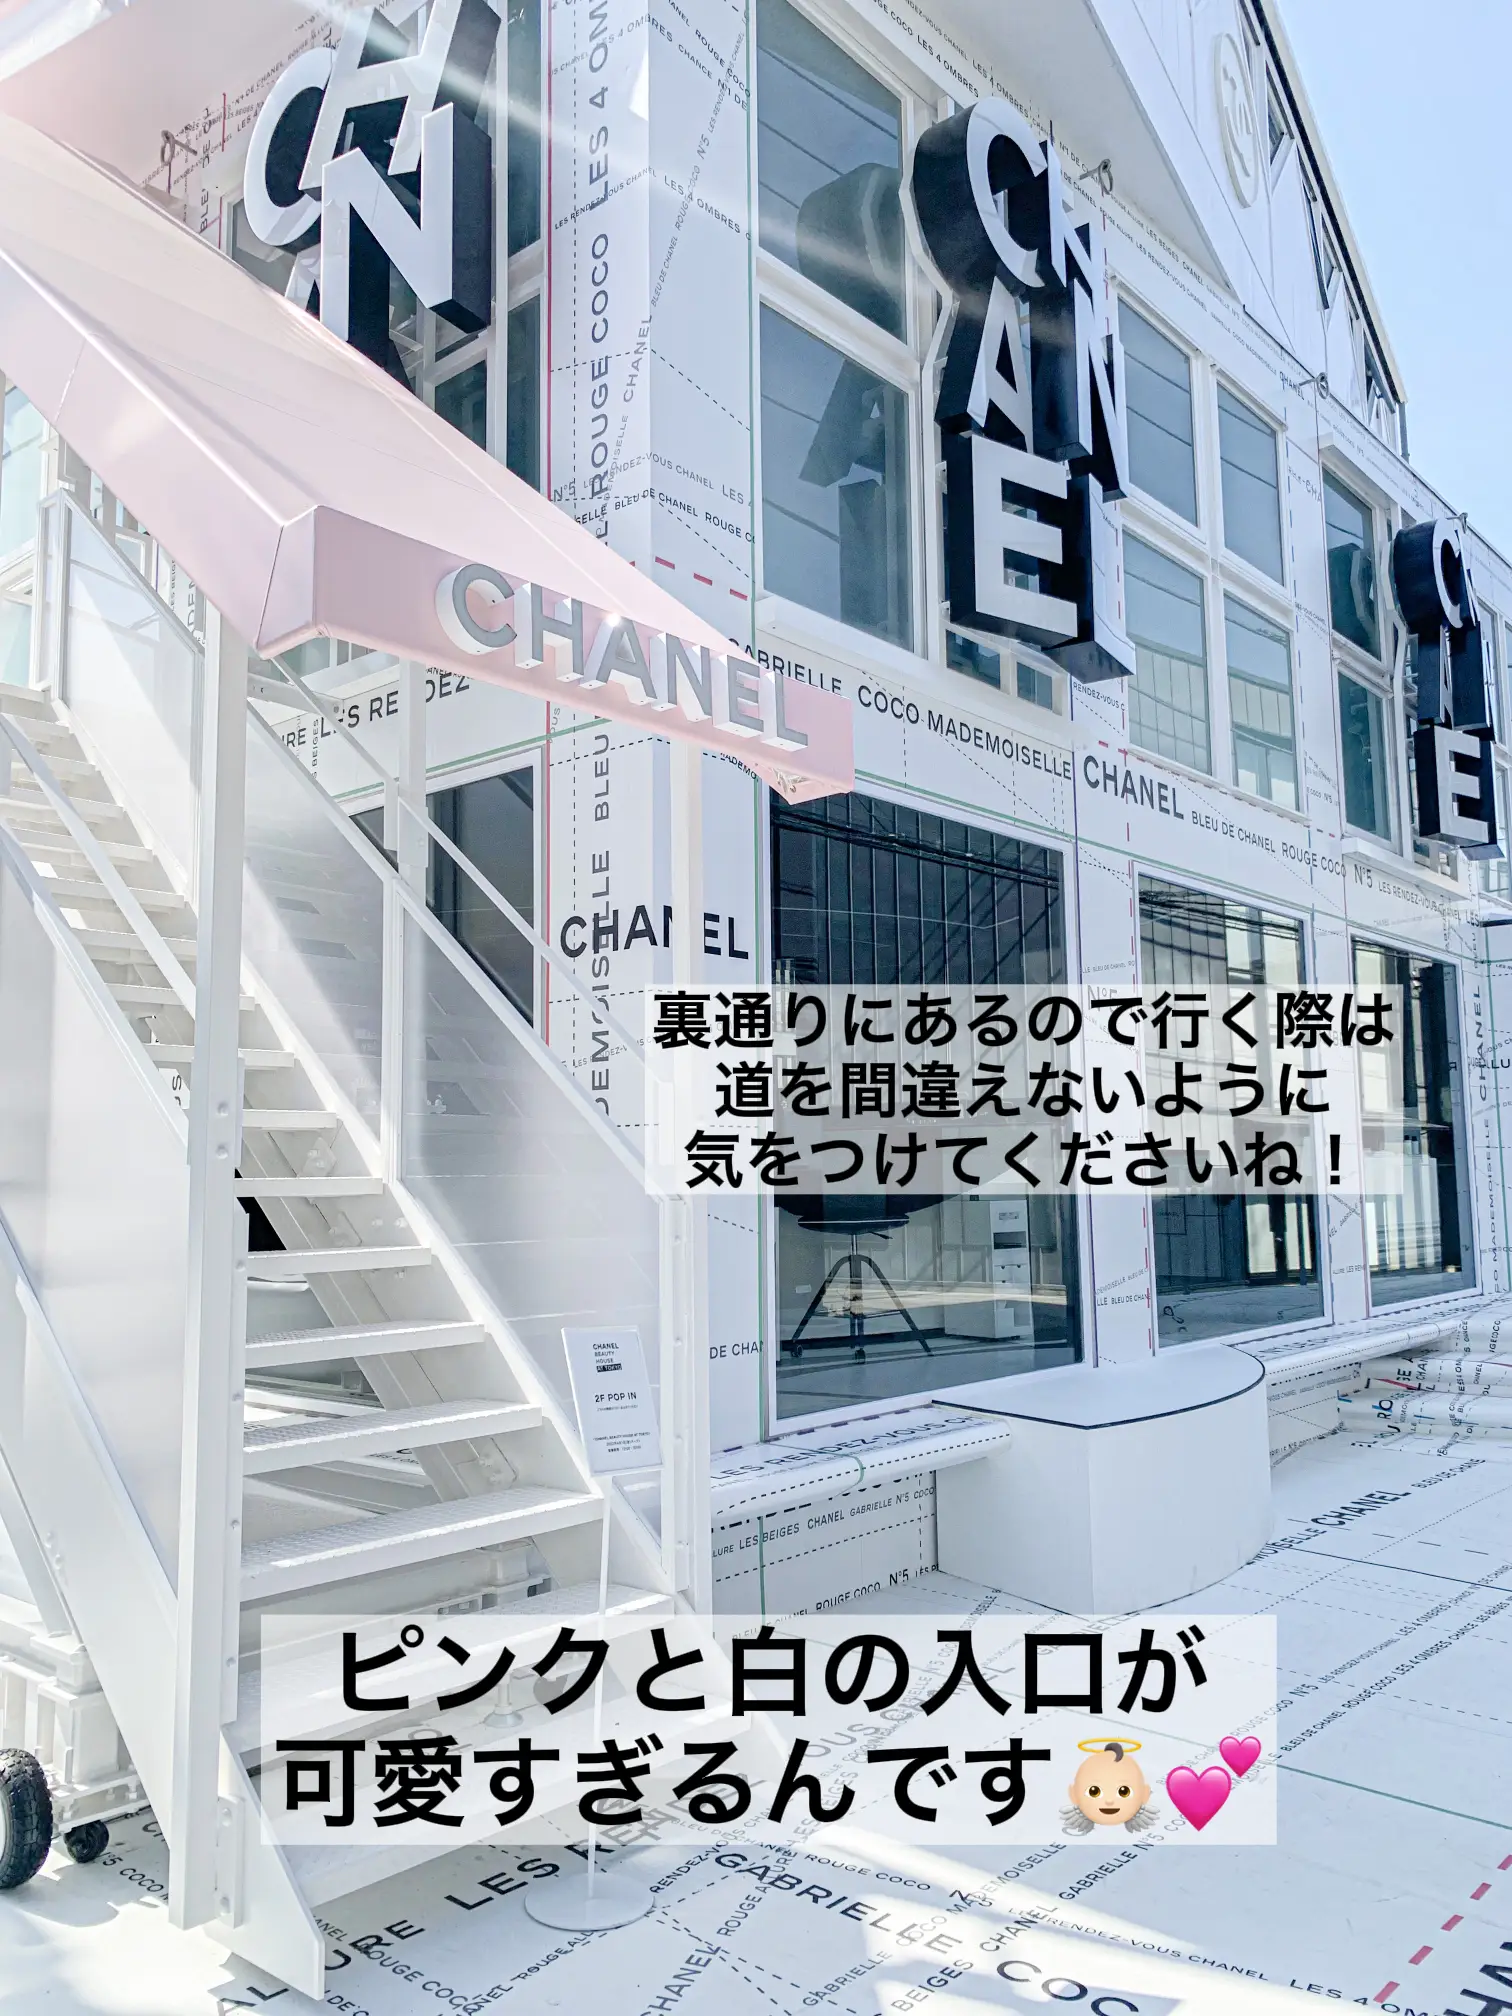 Coco Chanel Cafe in Tokyo is THE spot to test out the latest Chanel makeup  product